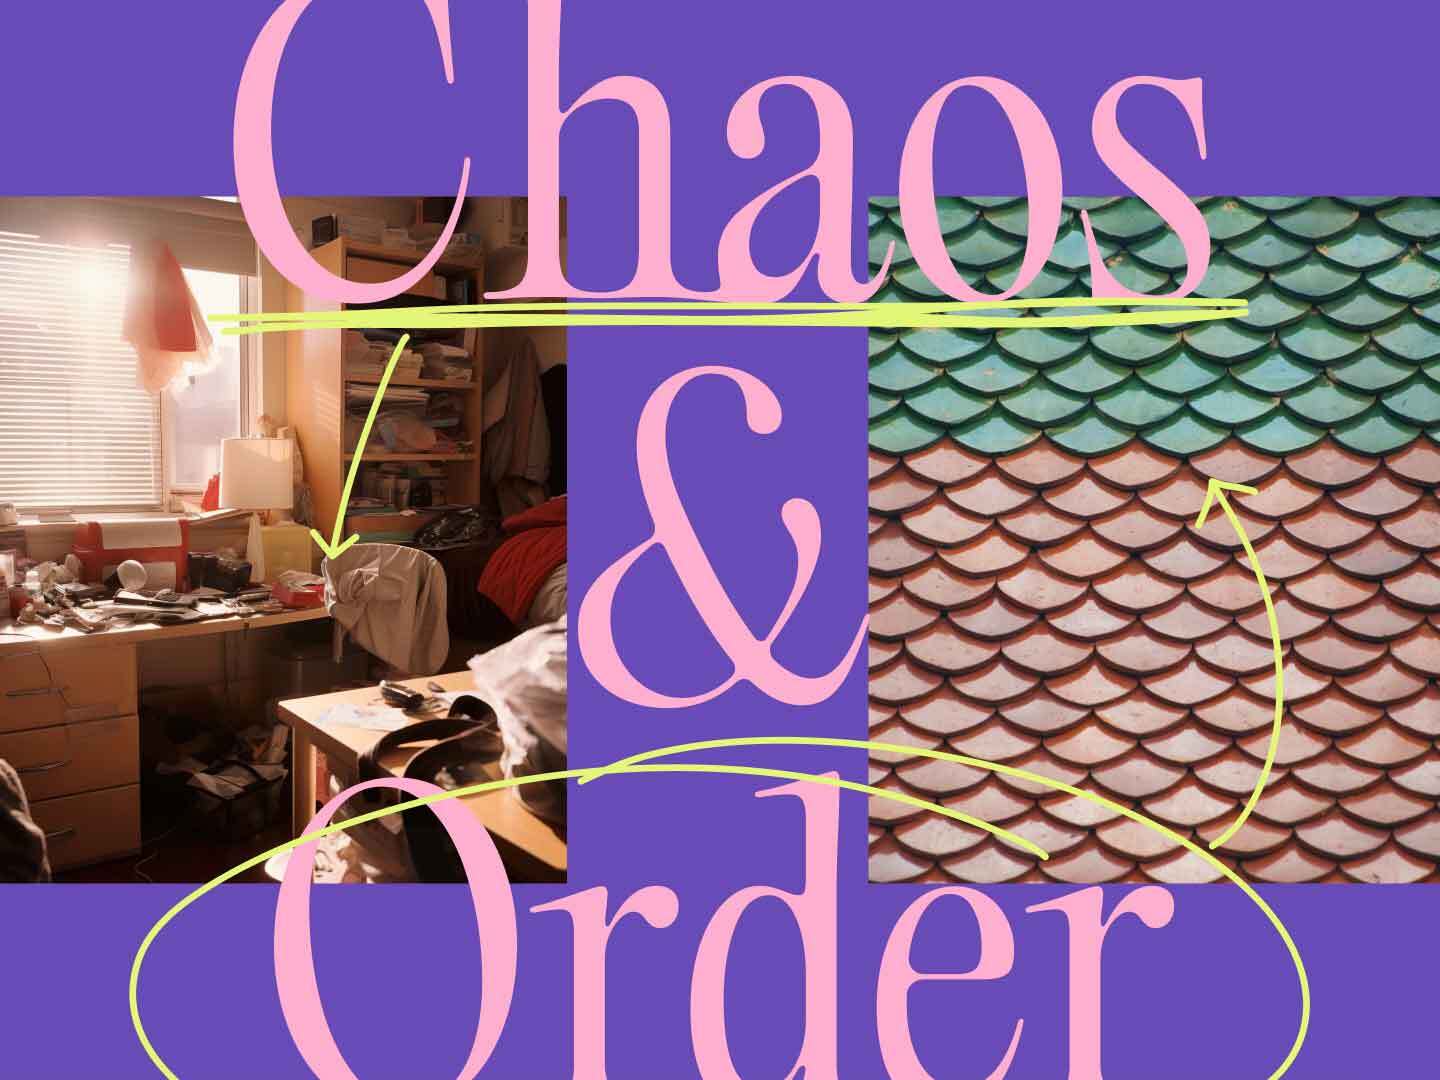 Chaos & Order key graphic blog content depicting a messy room and a neatly ordered tile pattern